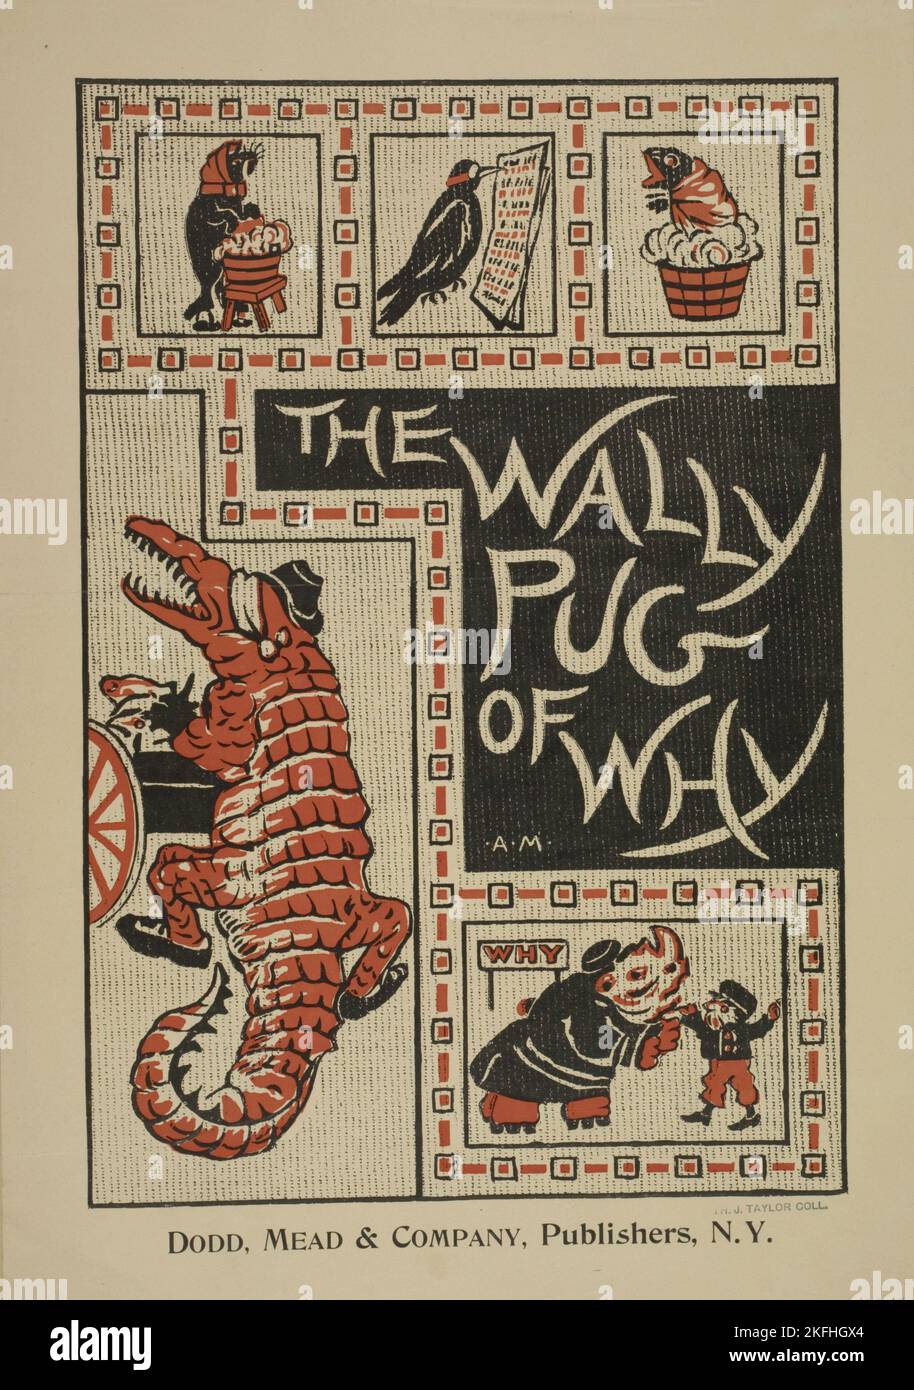 The Wally Pug of Why, c1896. Stock Photo